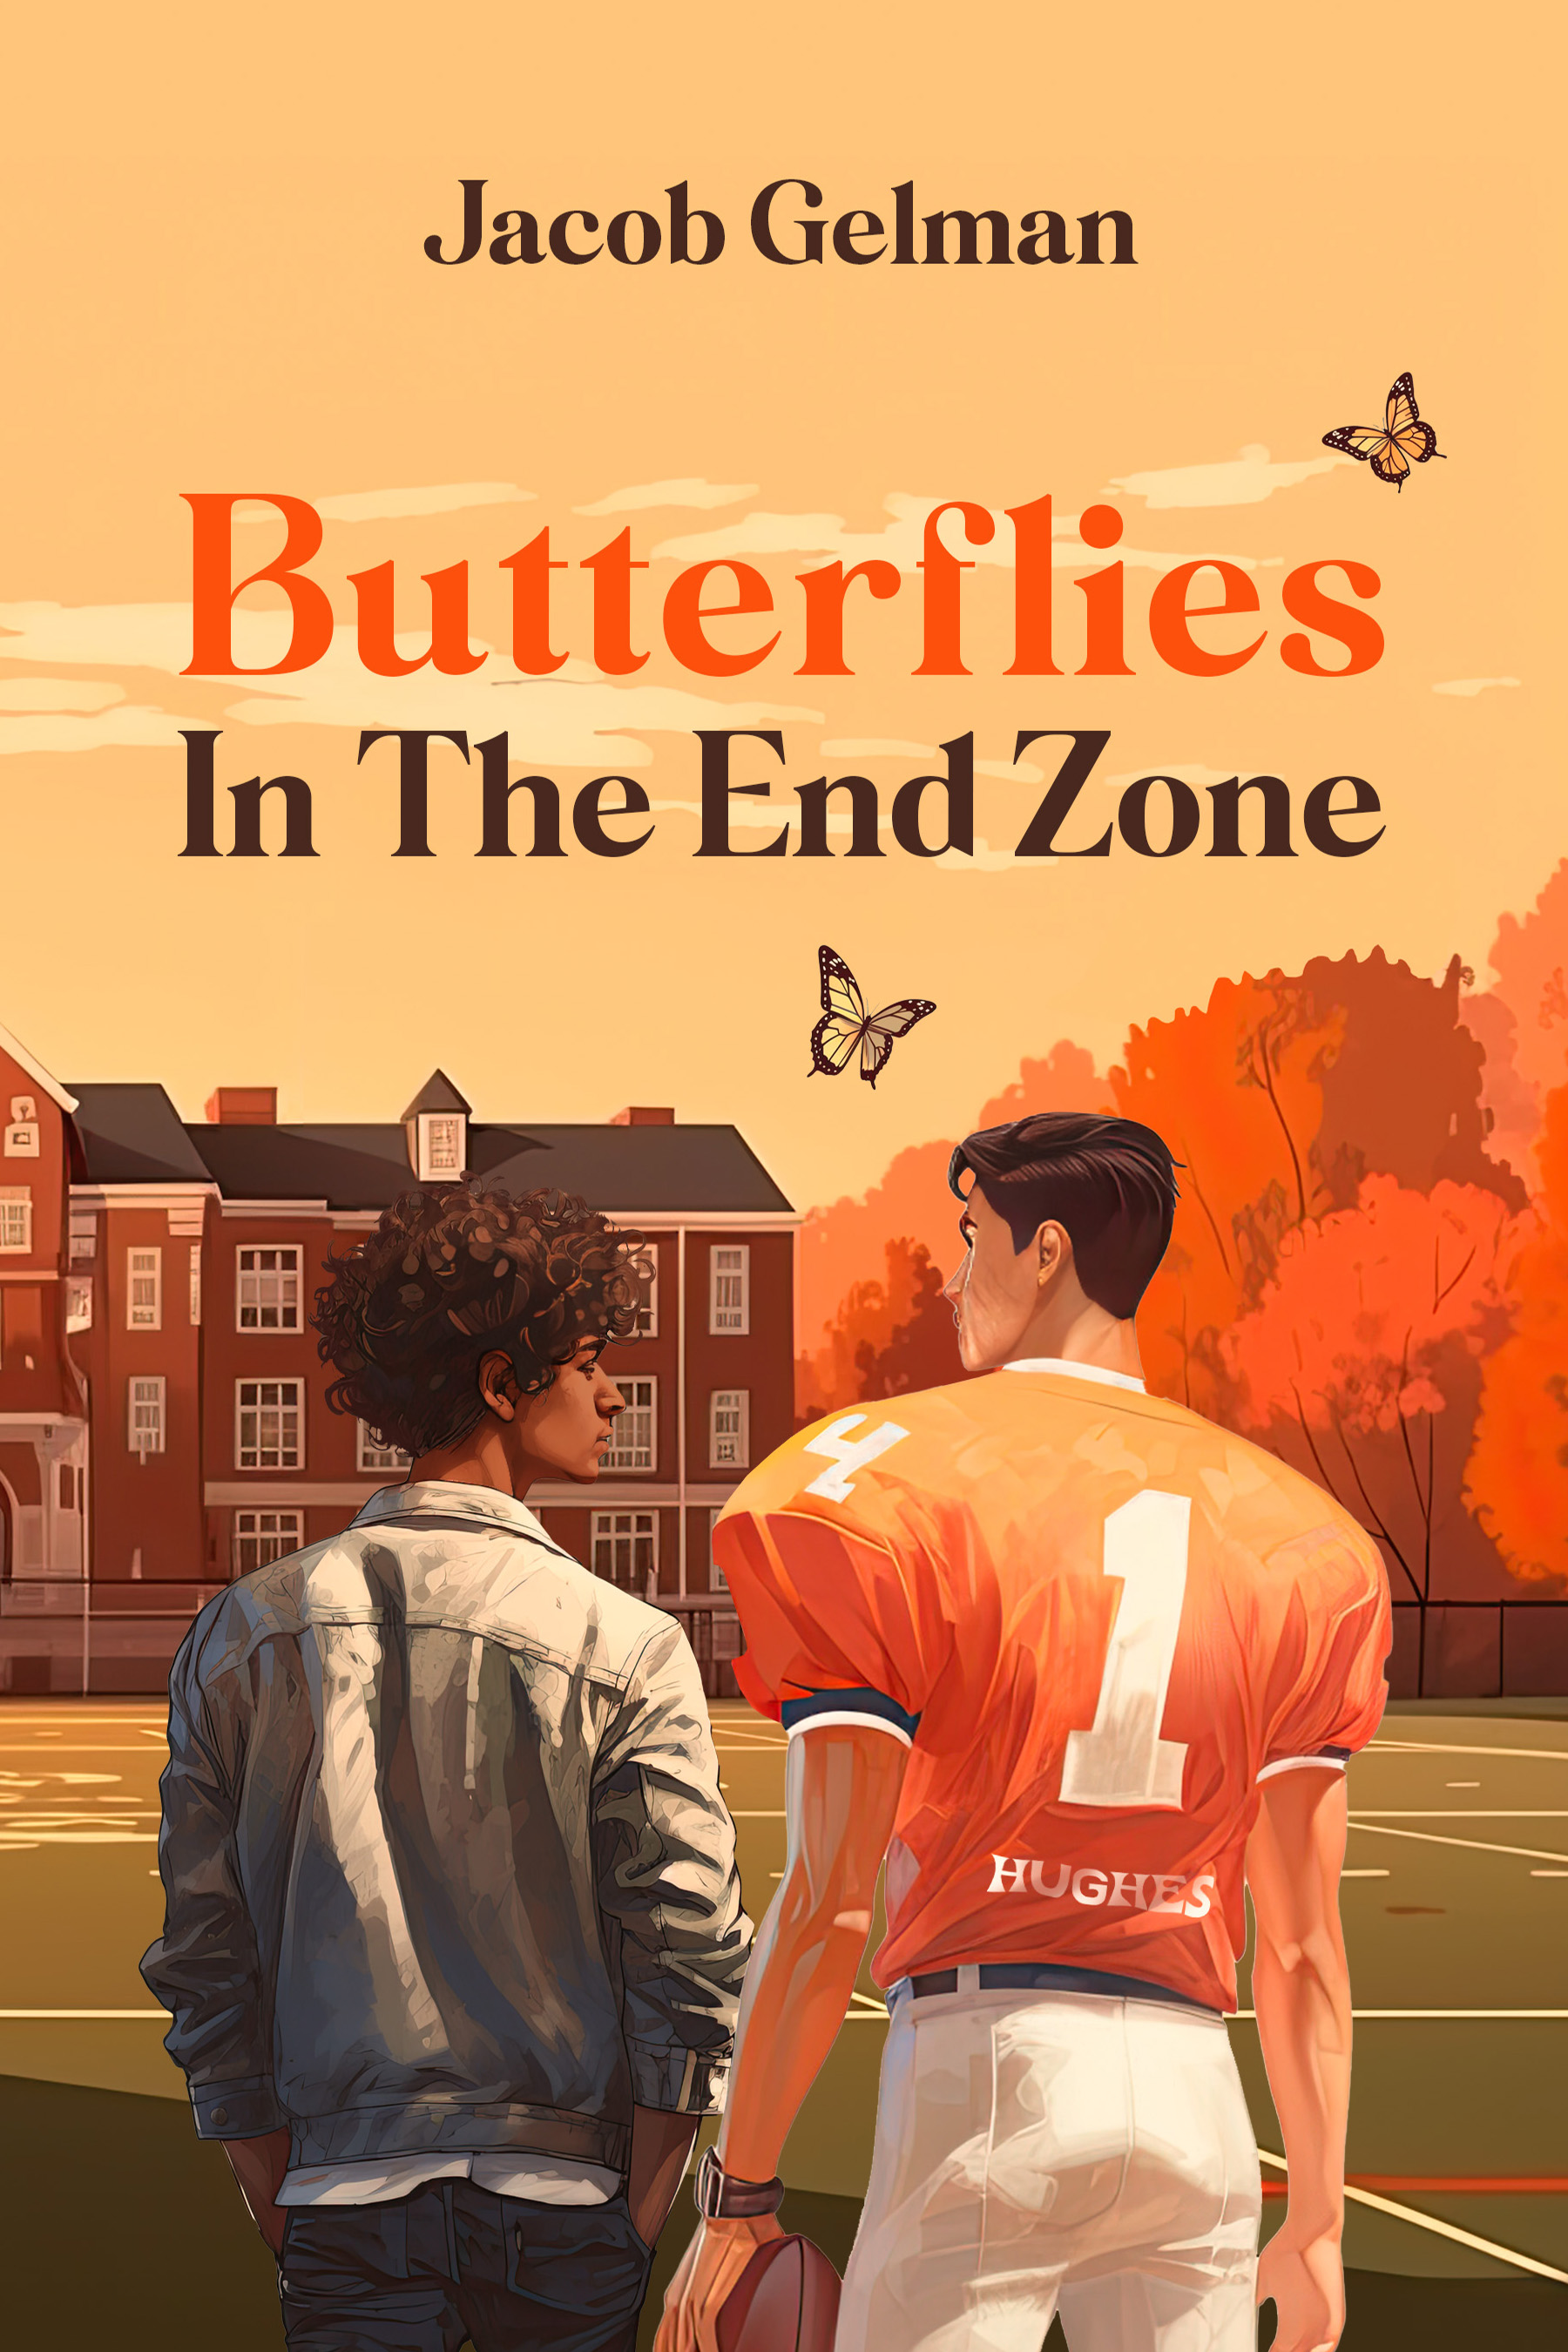 Author Jacob Gelman Sets Pre-release for the Novel "Butterflies in the End Zone"